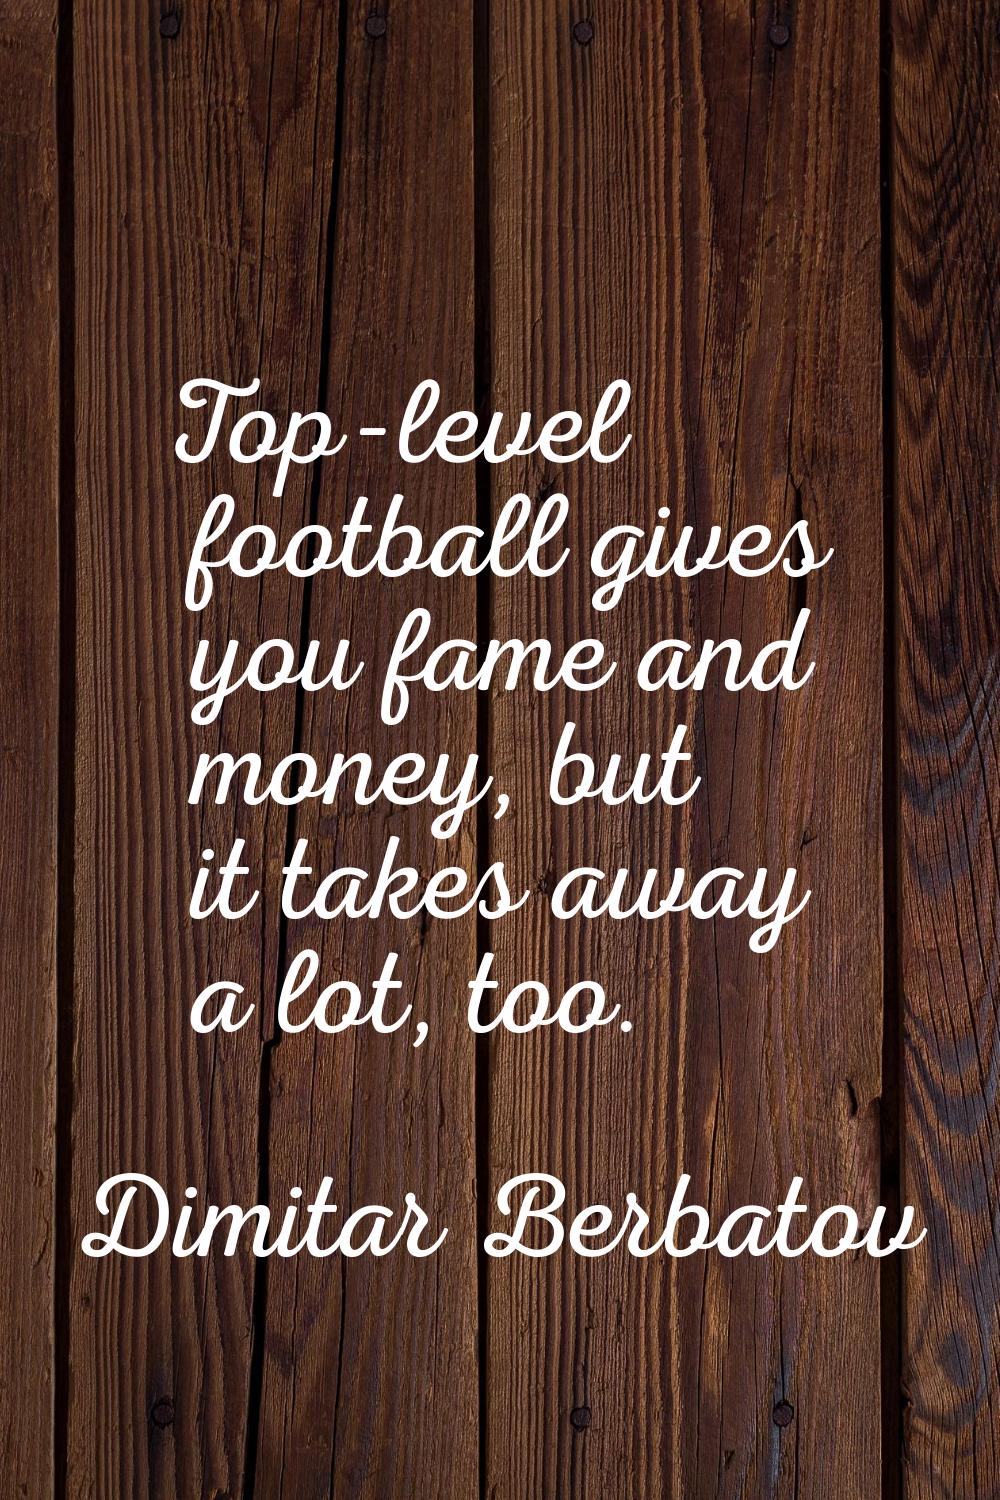 Top-level football gives you fame and money, but it takes away a lot, too.